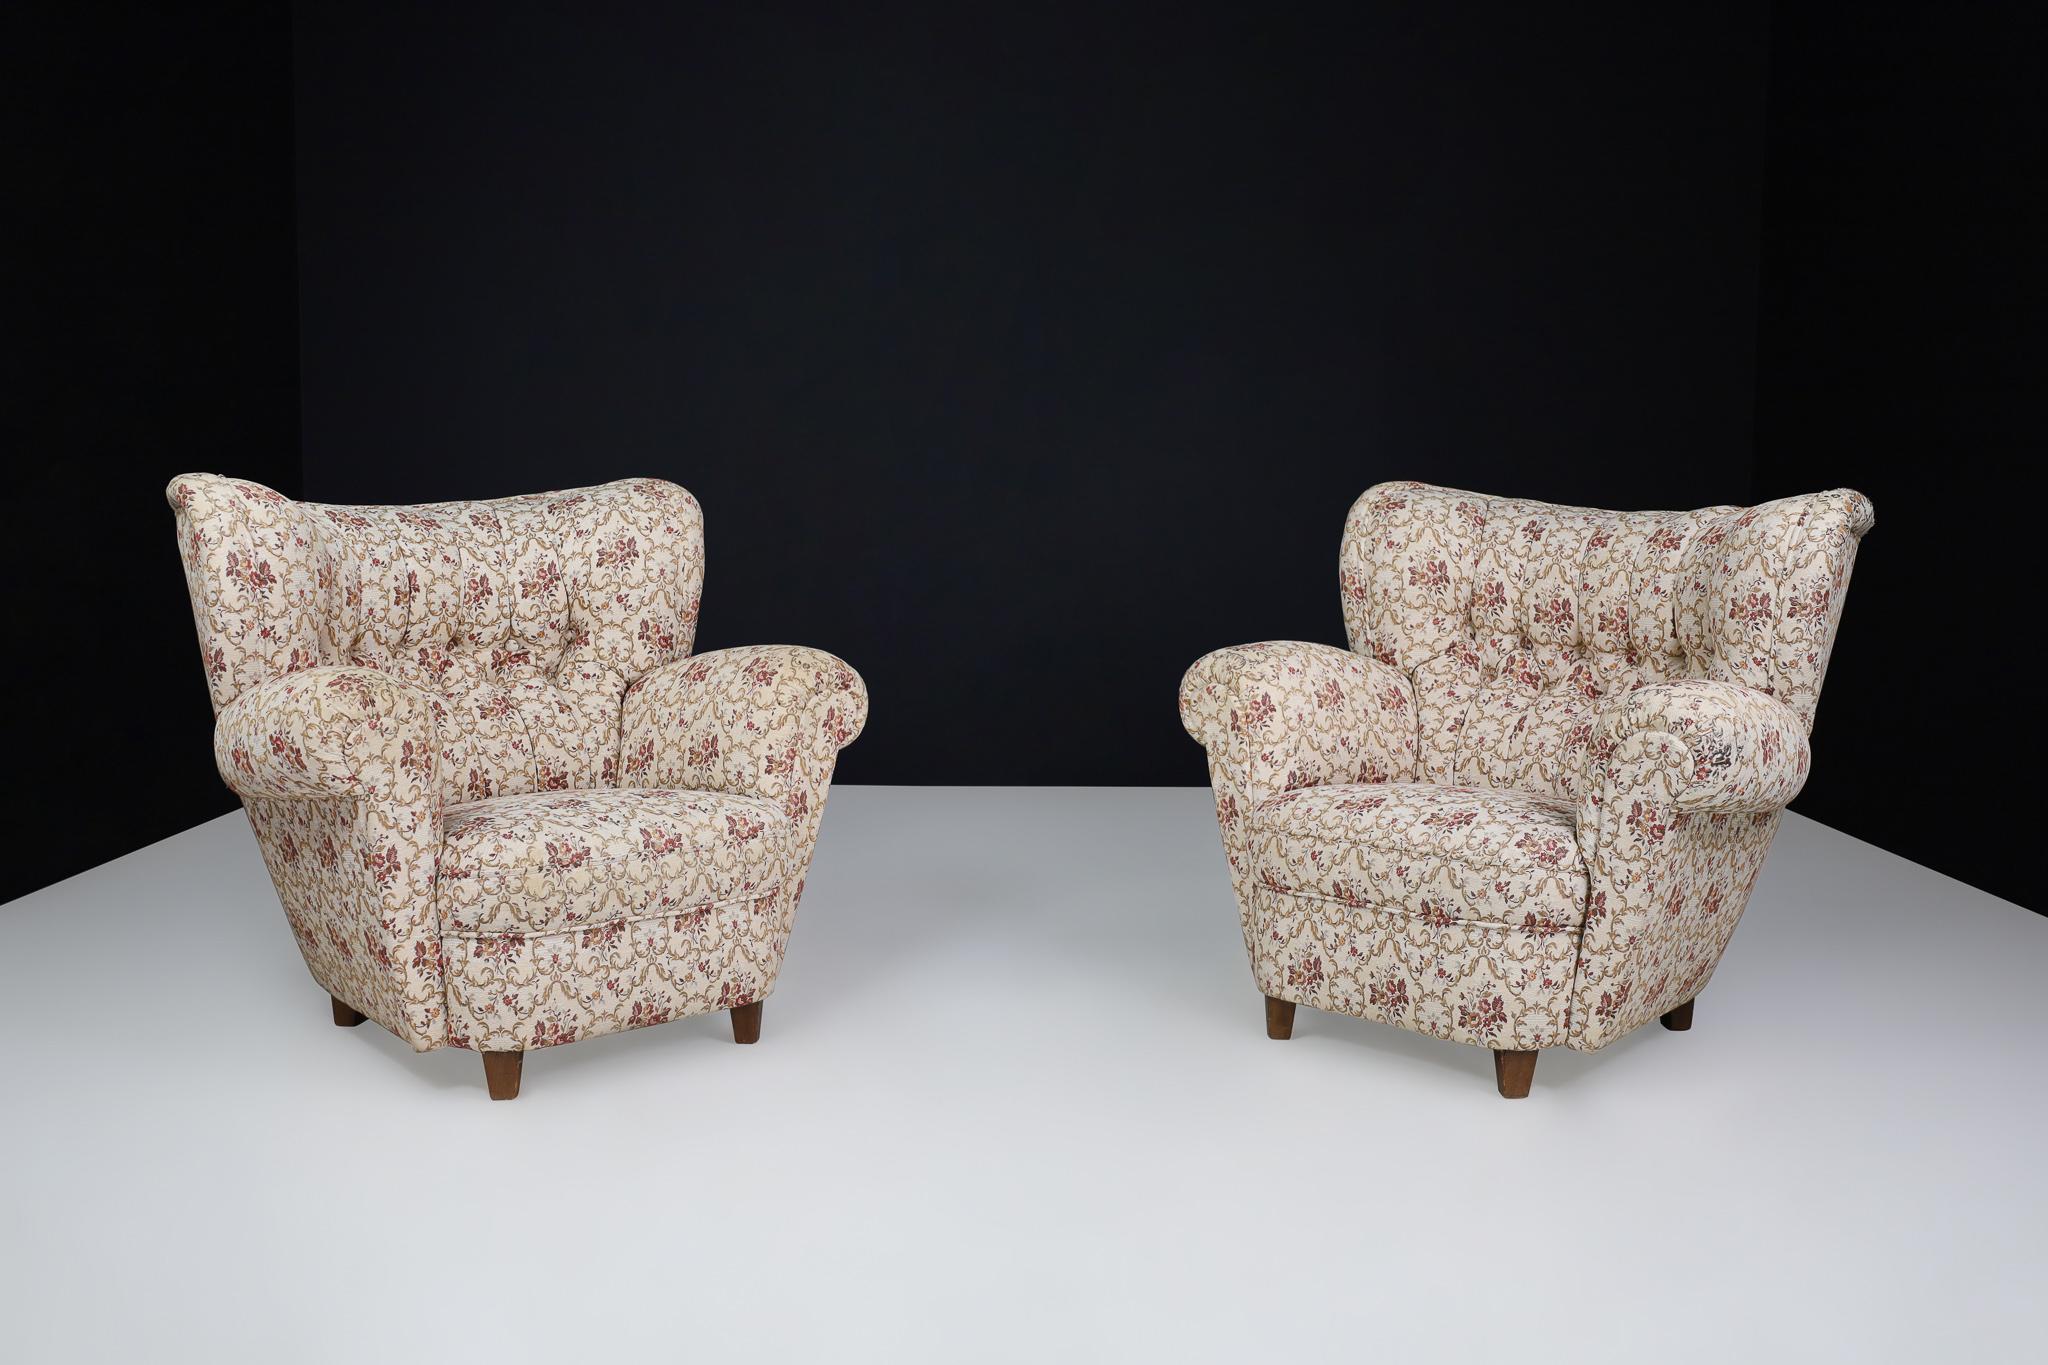 Art Deco Large Art-Deco Pair Armchairs in Original Floral Upholstery, Praque 1930s For Sale